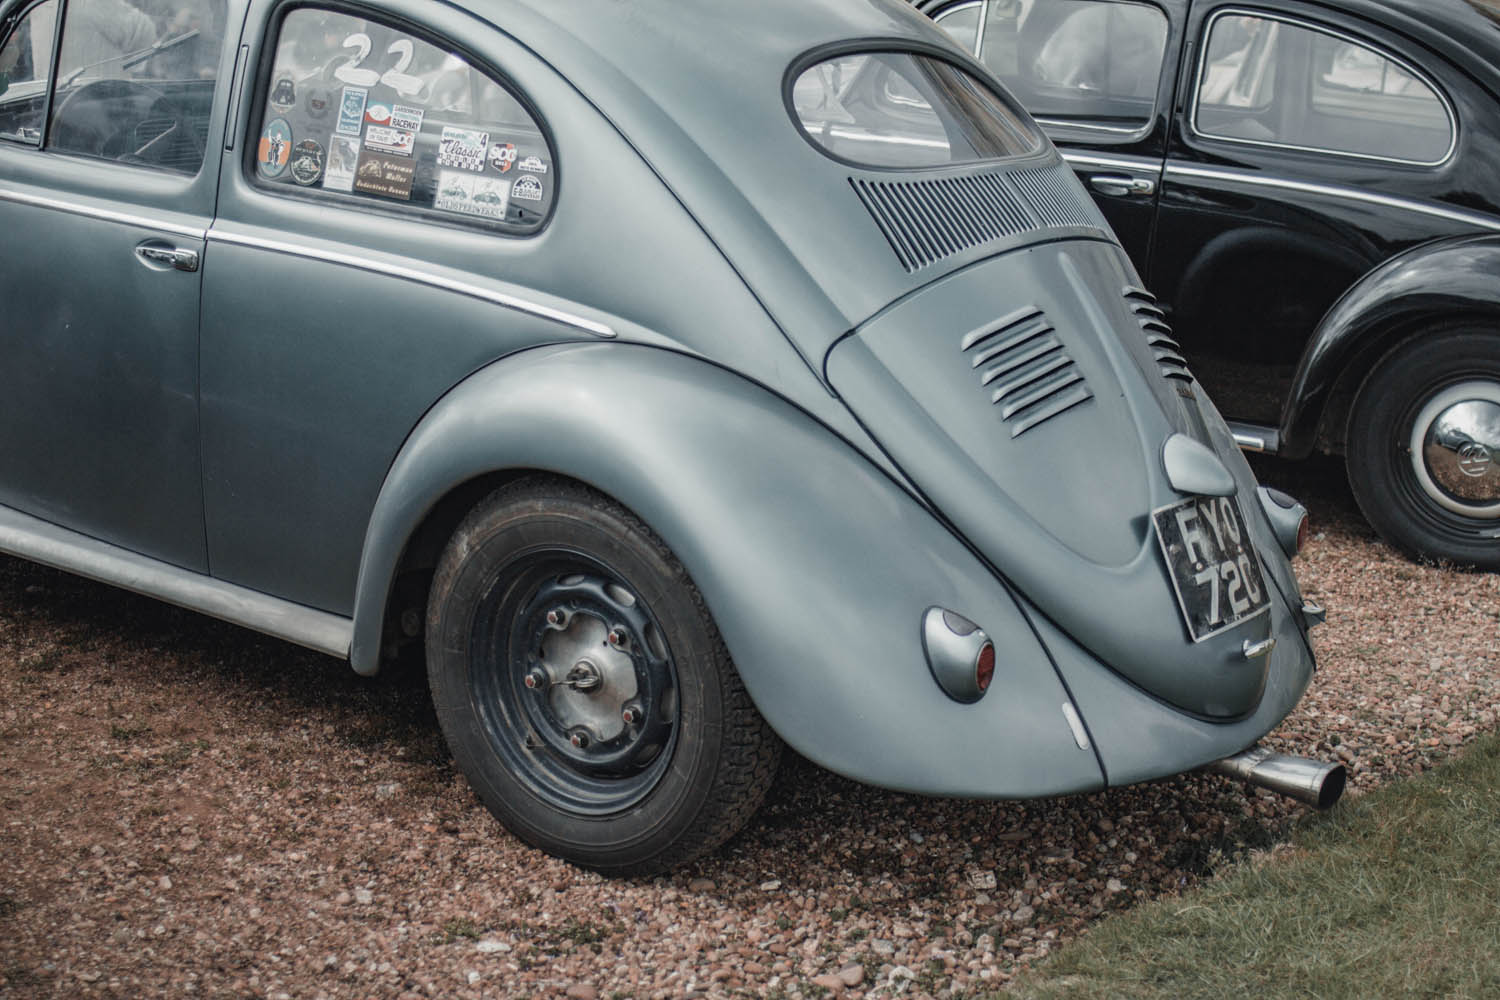 Oval Window Beetle at Stanford Hall 2019